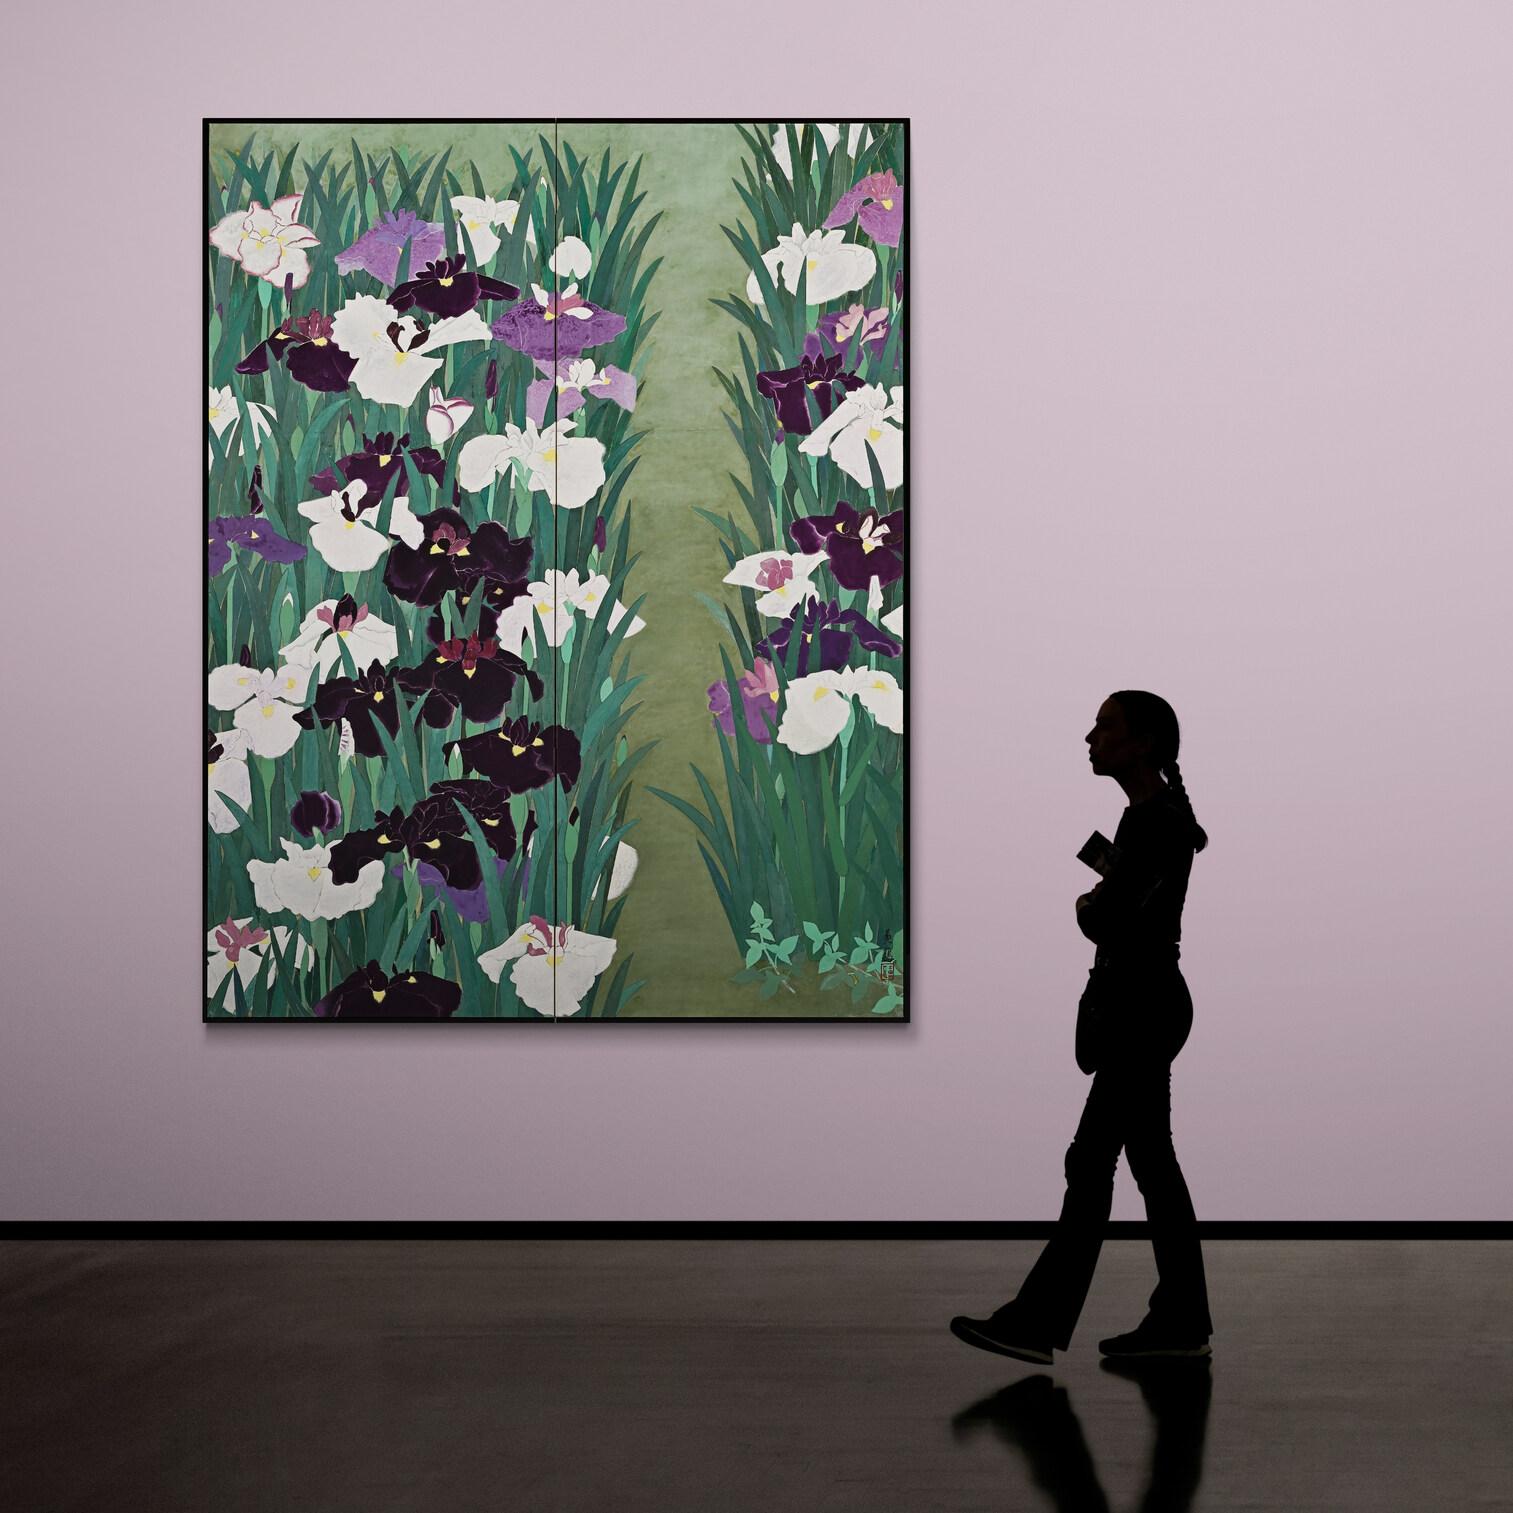 Kokaku Ouya (1911-1966)

June

1954

Two-panel Japanese screen. Mineral pigments on paper.

In this early Postwar Nihonga painting title ‘June’ a field of blooming irises fills the expansive picture plane. The work is a unification of the